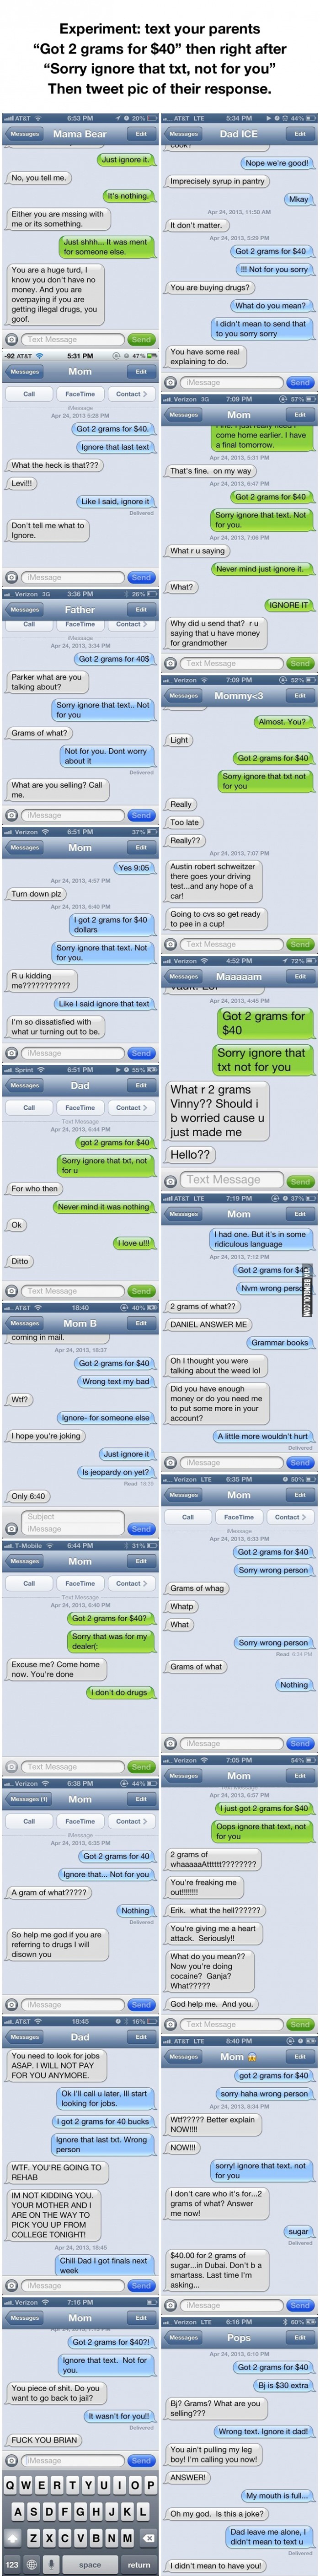 What Happens If You Text Your Parents Pretending to Be a Drug Dealer?